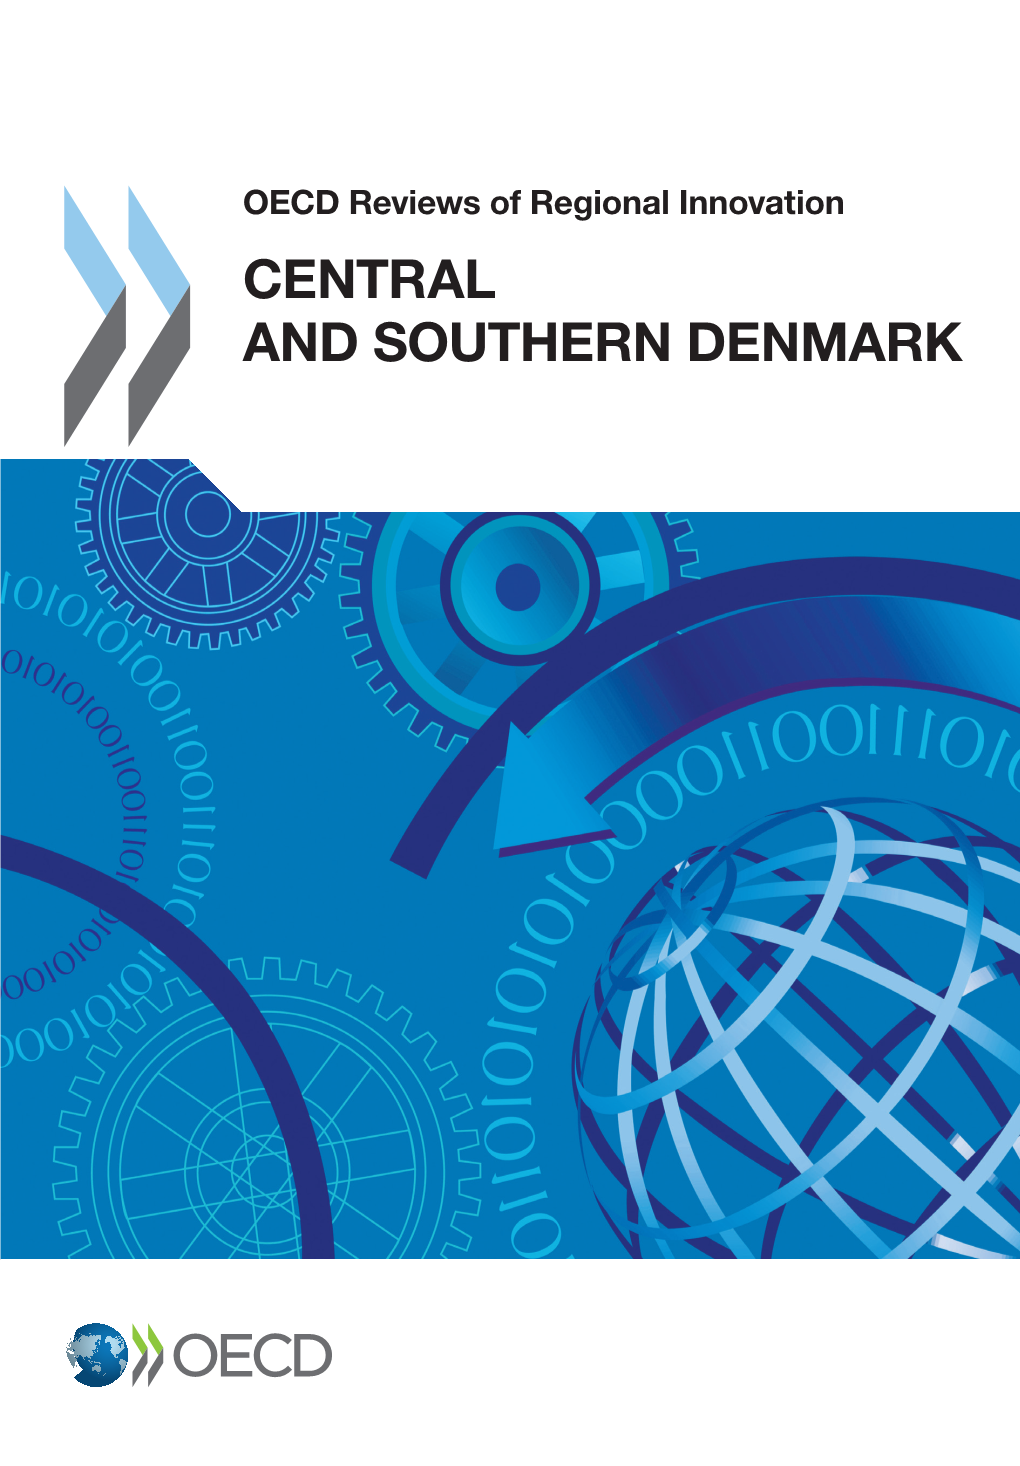 OECD Reviews of Regional Innovation OECD Reviews of Regional Central and Southern Denmark